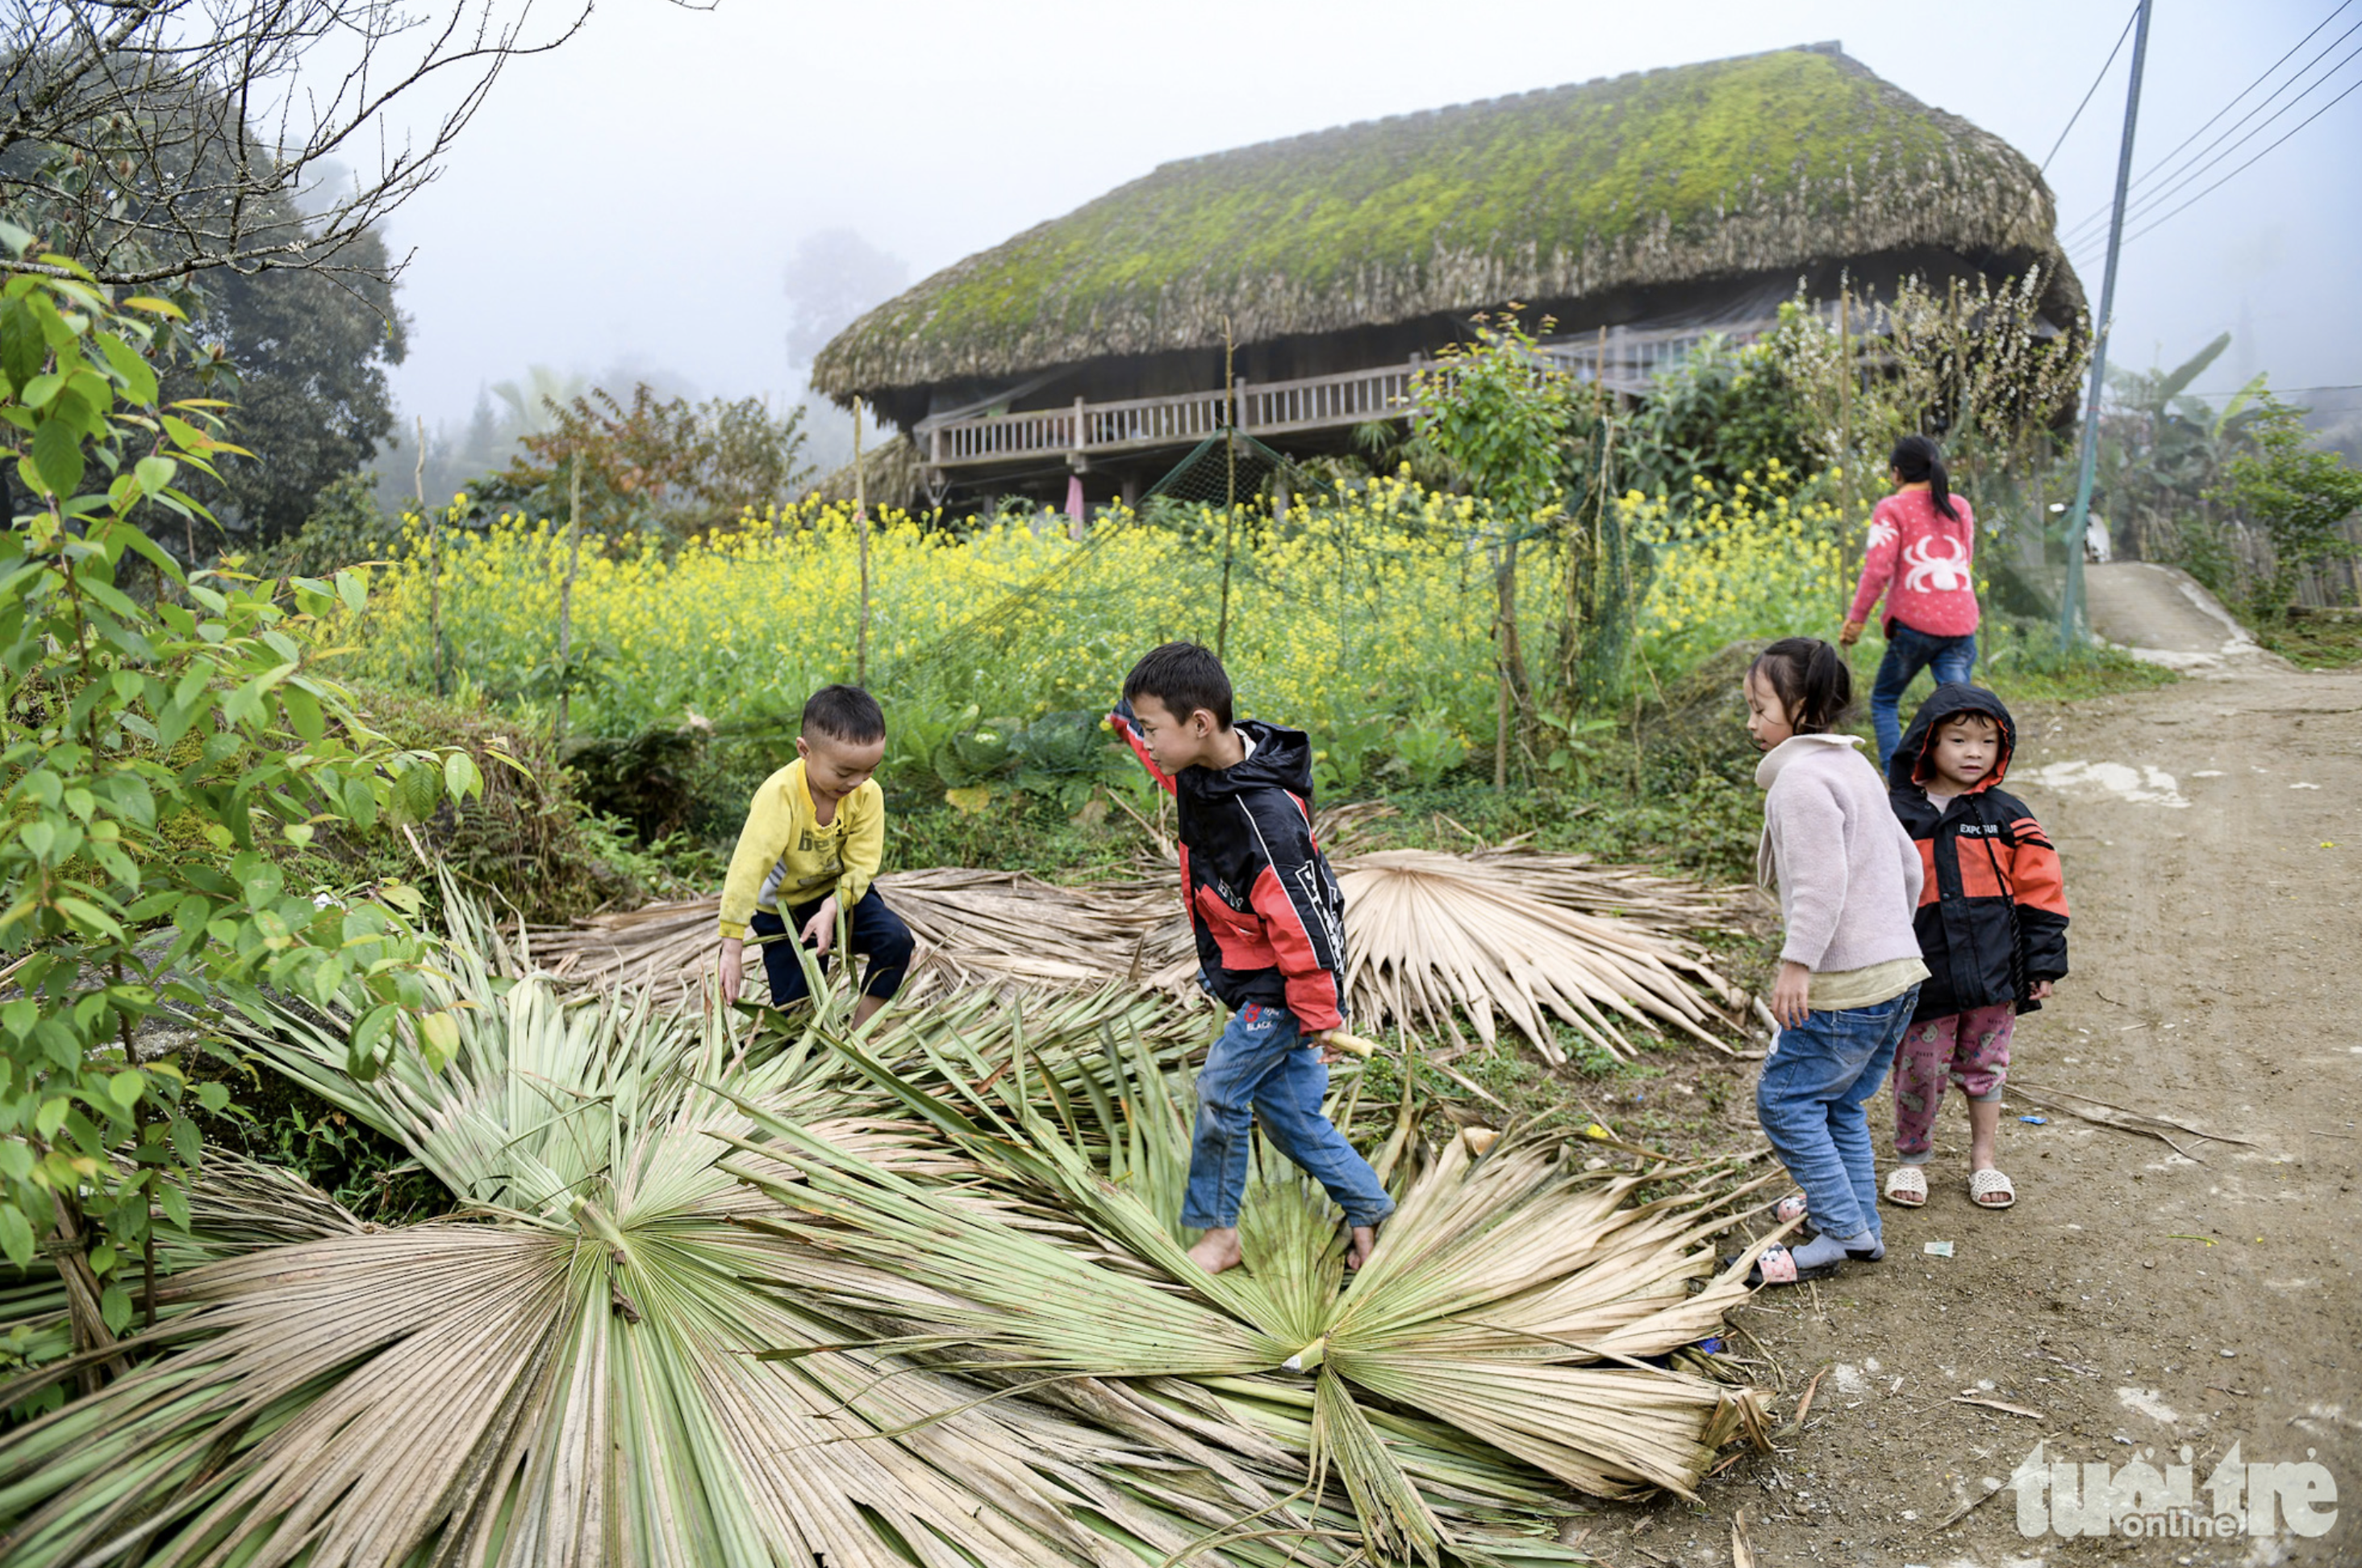 Stilt house roofs, made of palm leaves, have a lifespan of 40 years. Photo: Nam Tran / Tuoi Tre